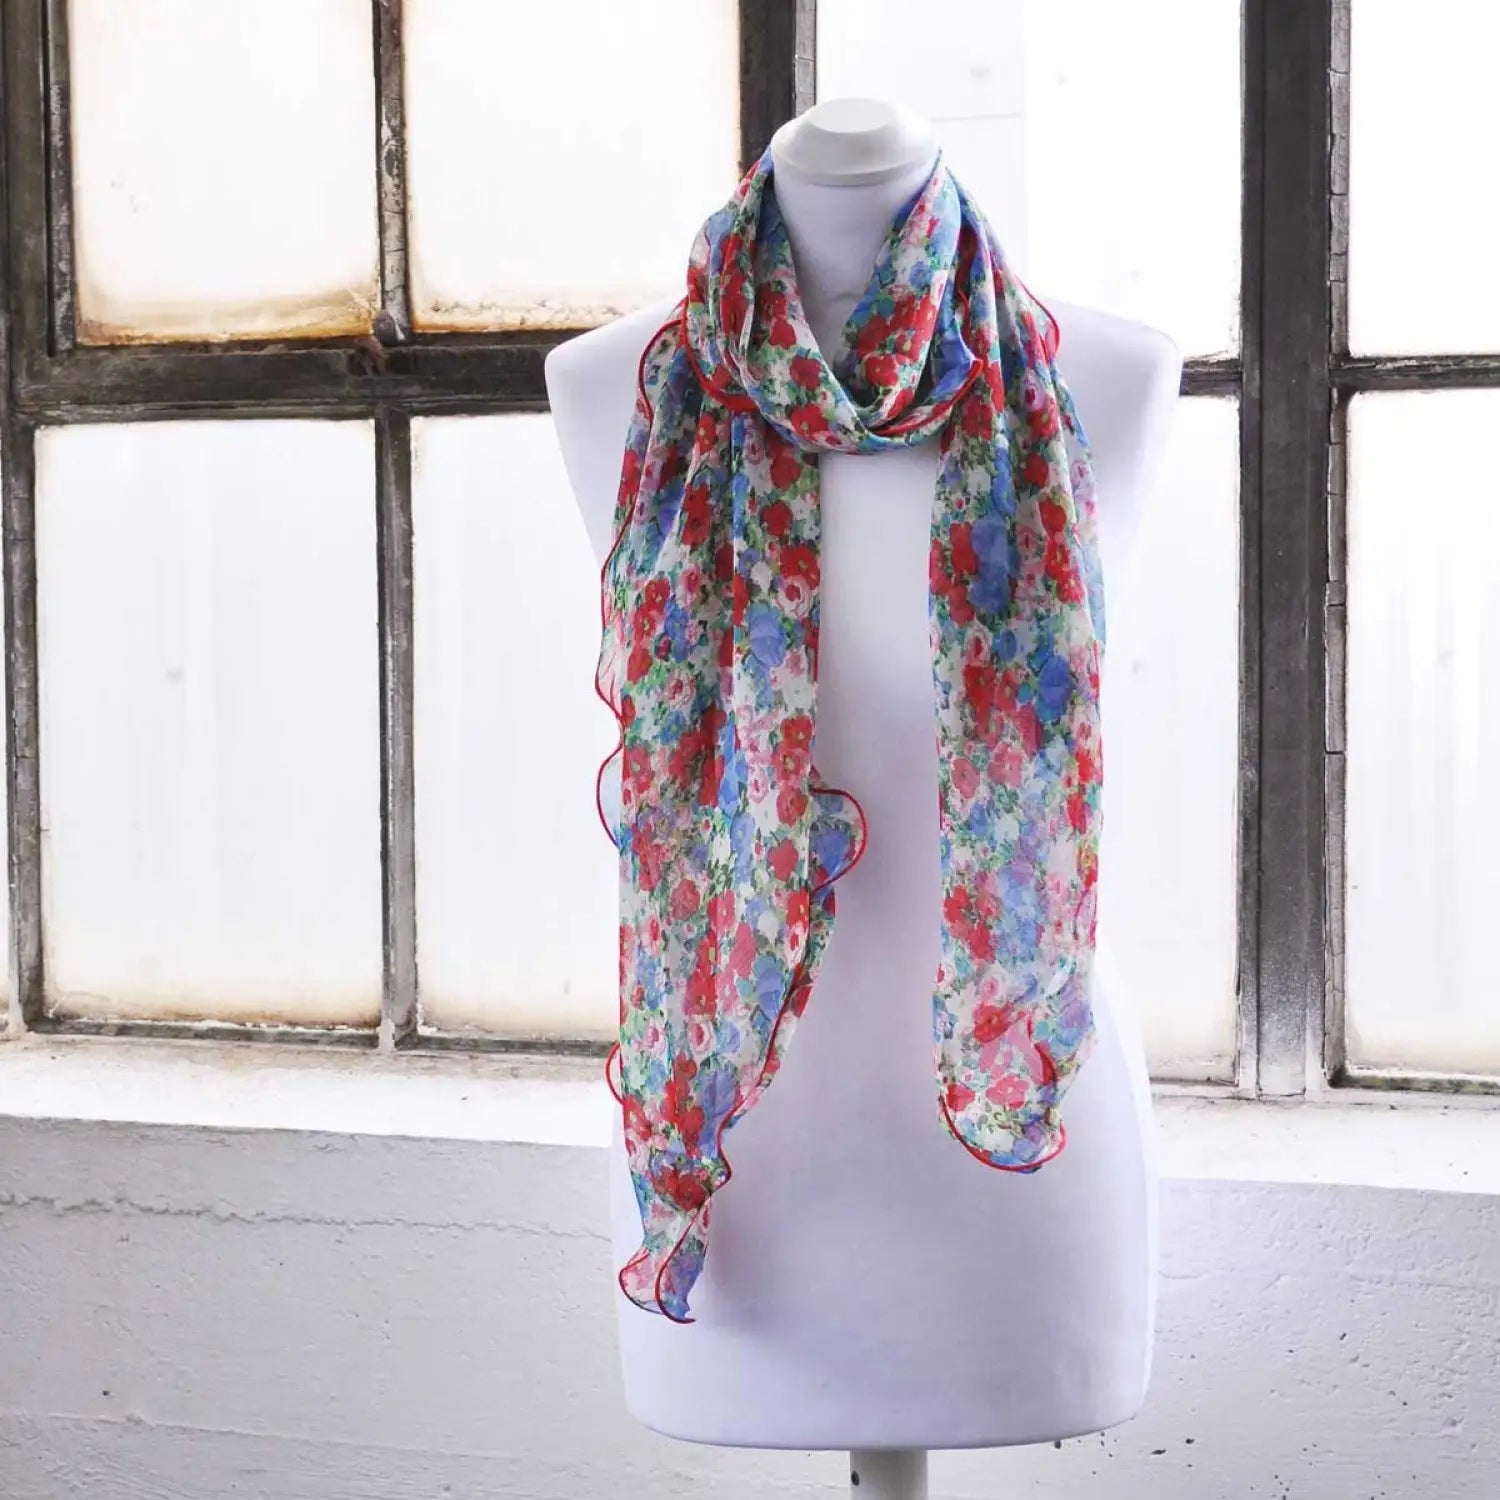 Chic Floral Print Waterfall-Edge Chiffon Scarf displayed on mannequin in front of window